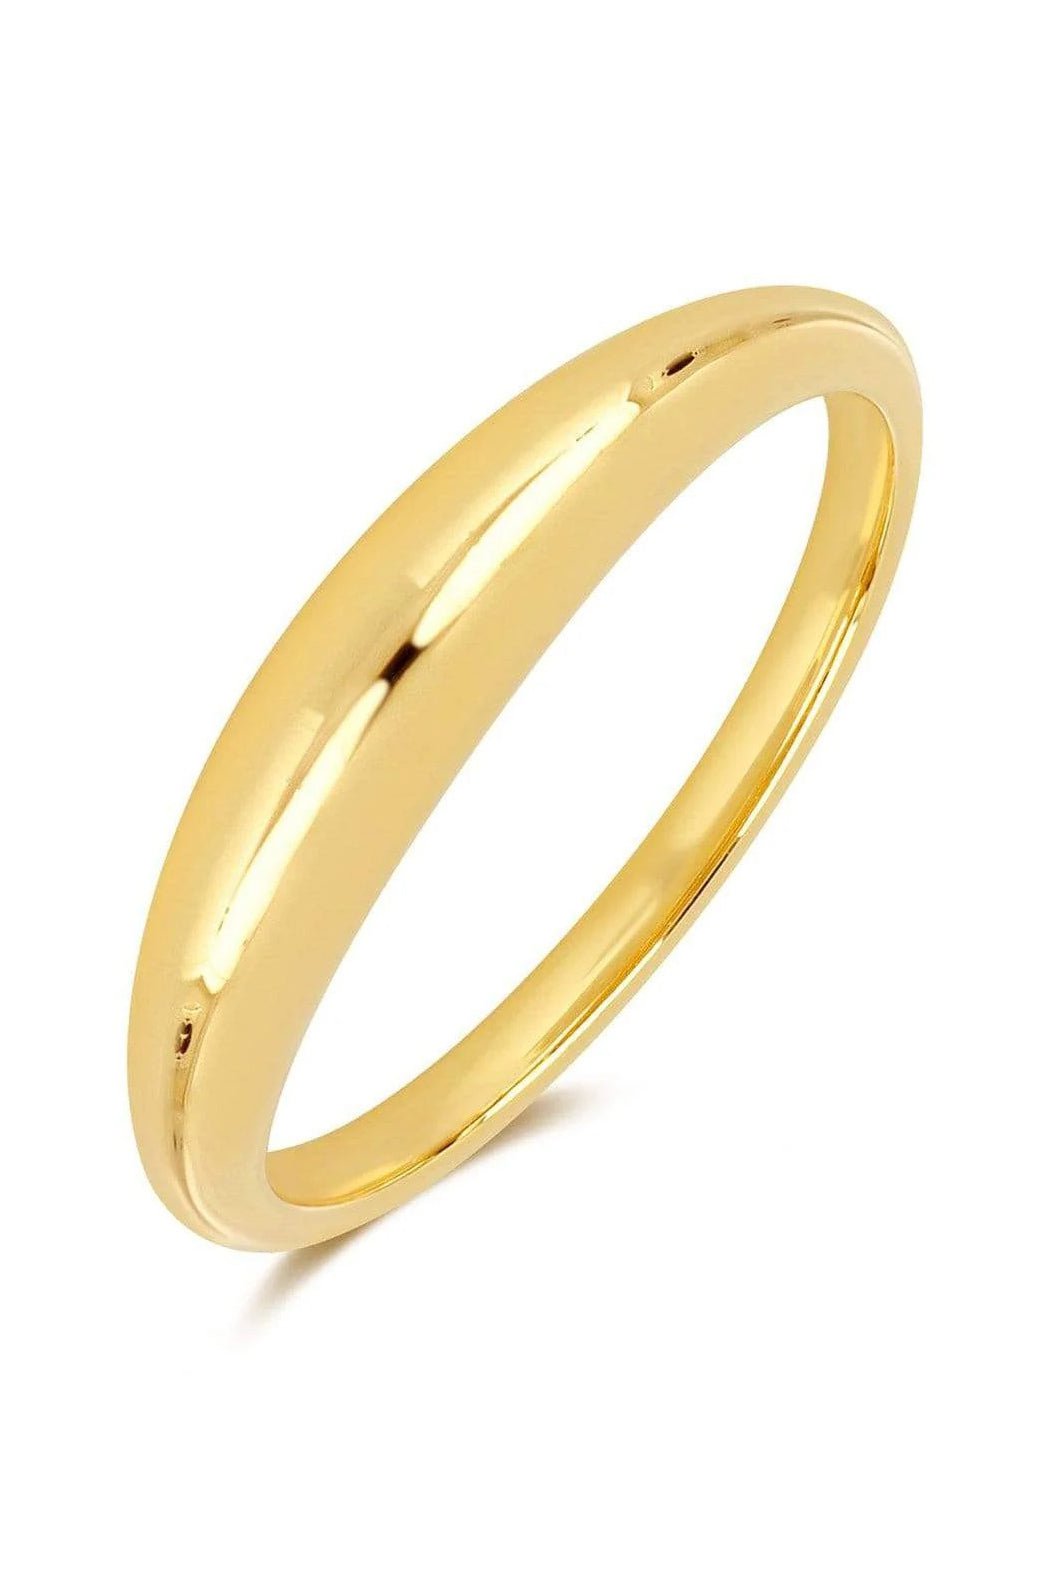 EF COLLECTION-Gold Dome Ring-YELLOW GOLD